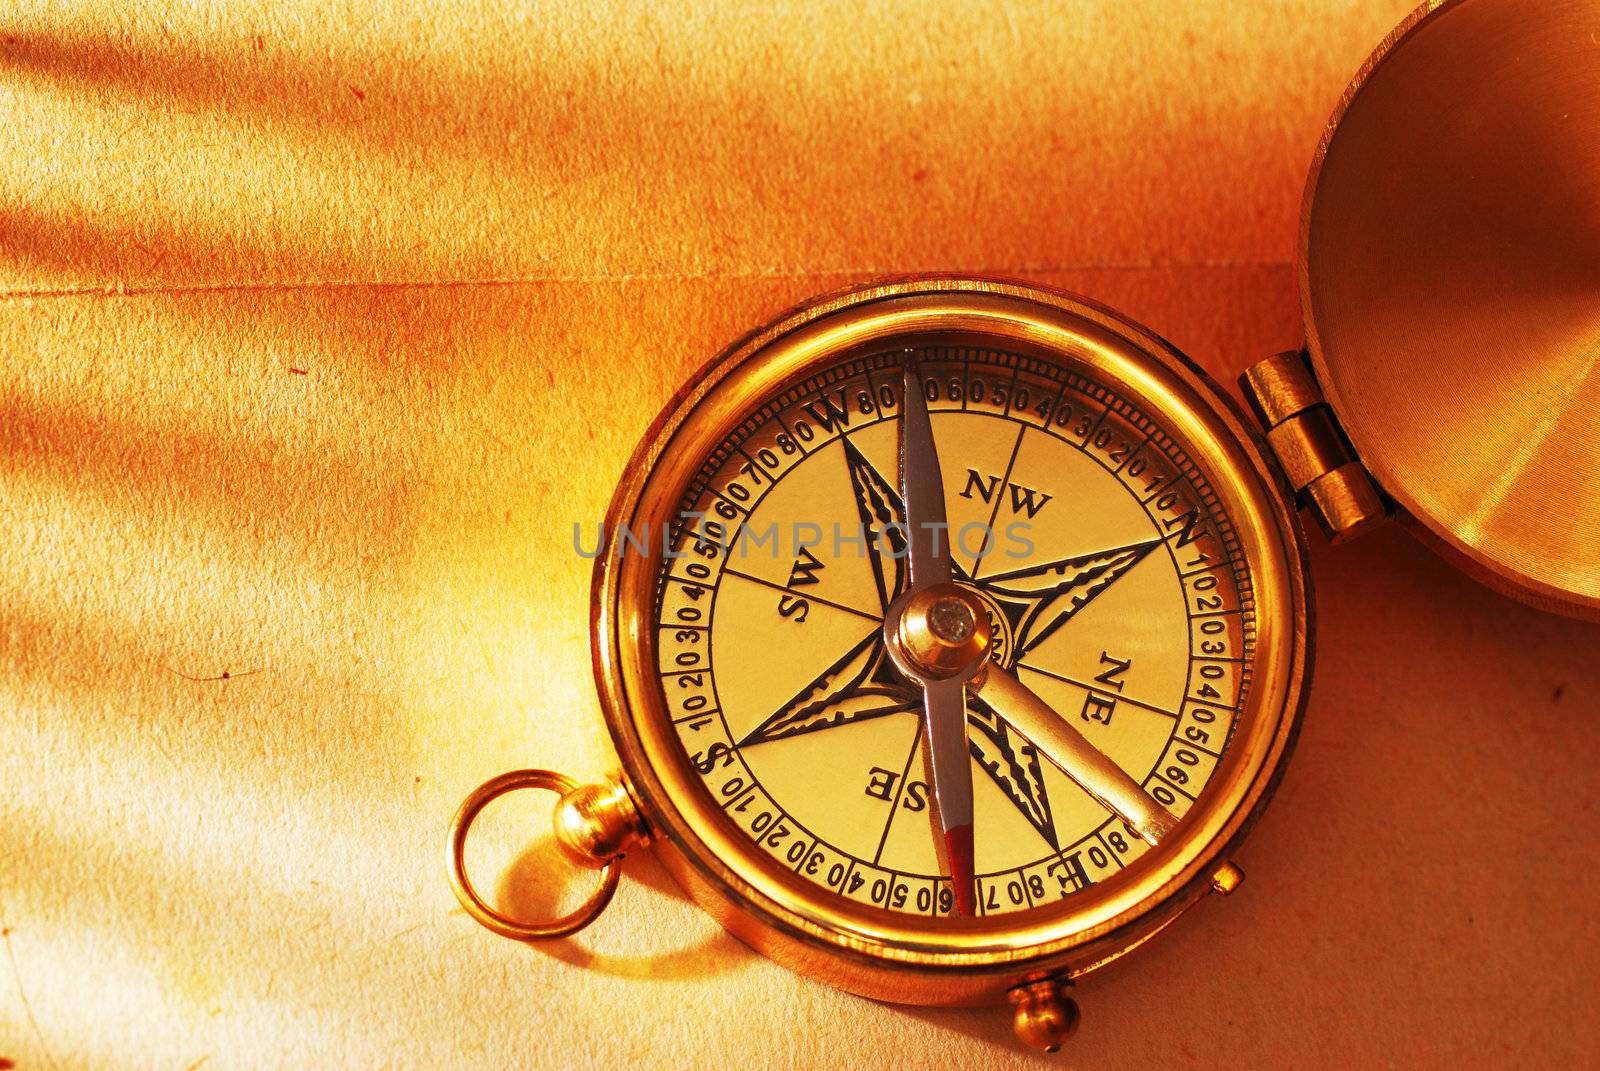 Antique brass compass over old background by haveseen